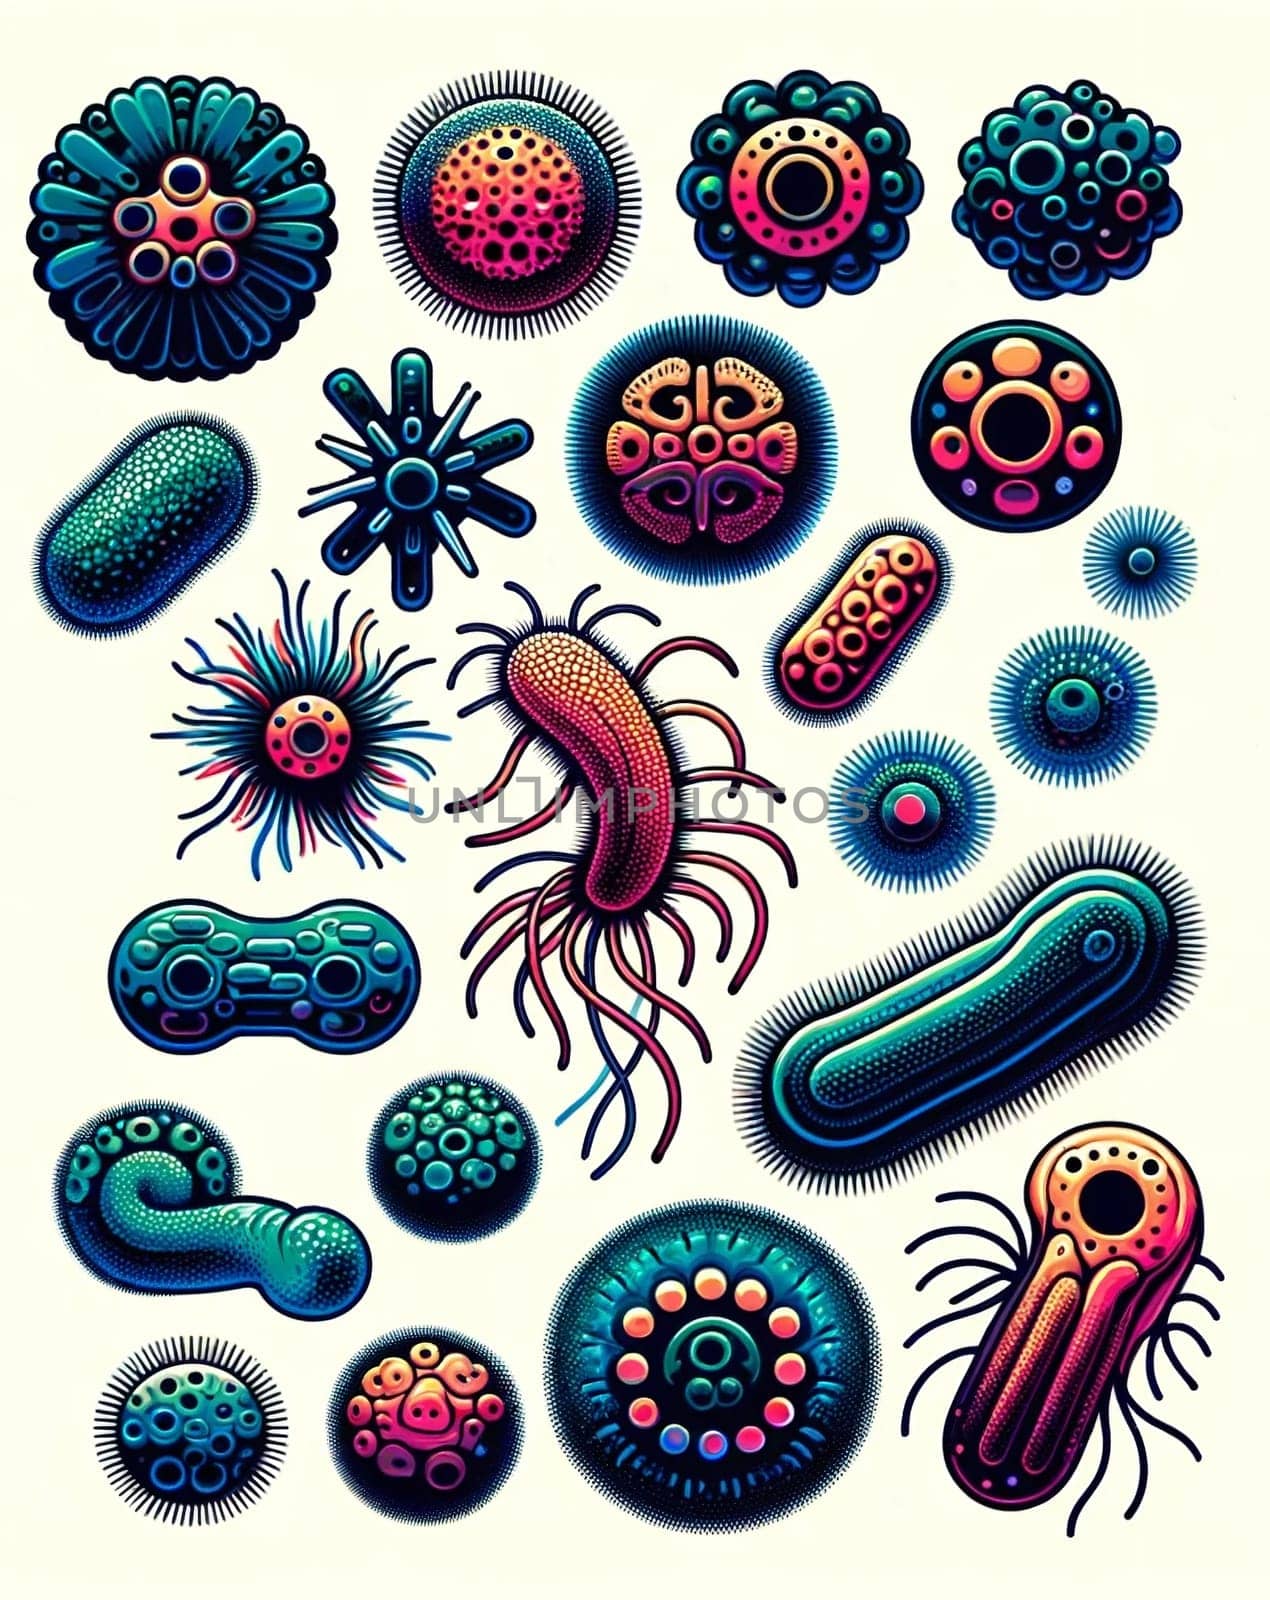 An imaginative, AI-generated composition featuring a variety of whimsical microbes, bacteria, and cells against a white backdrop, artistically rendered.